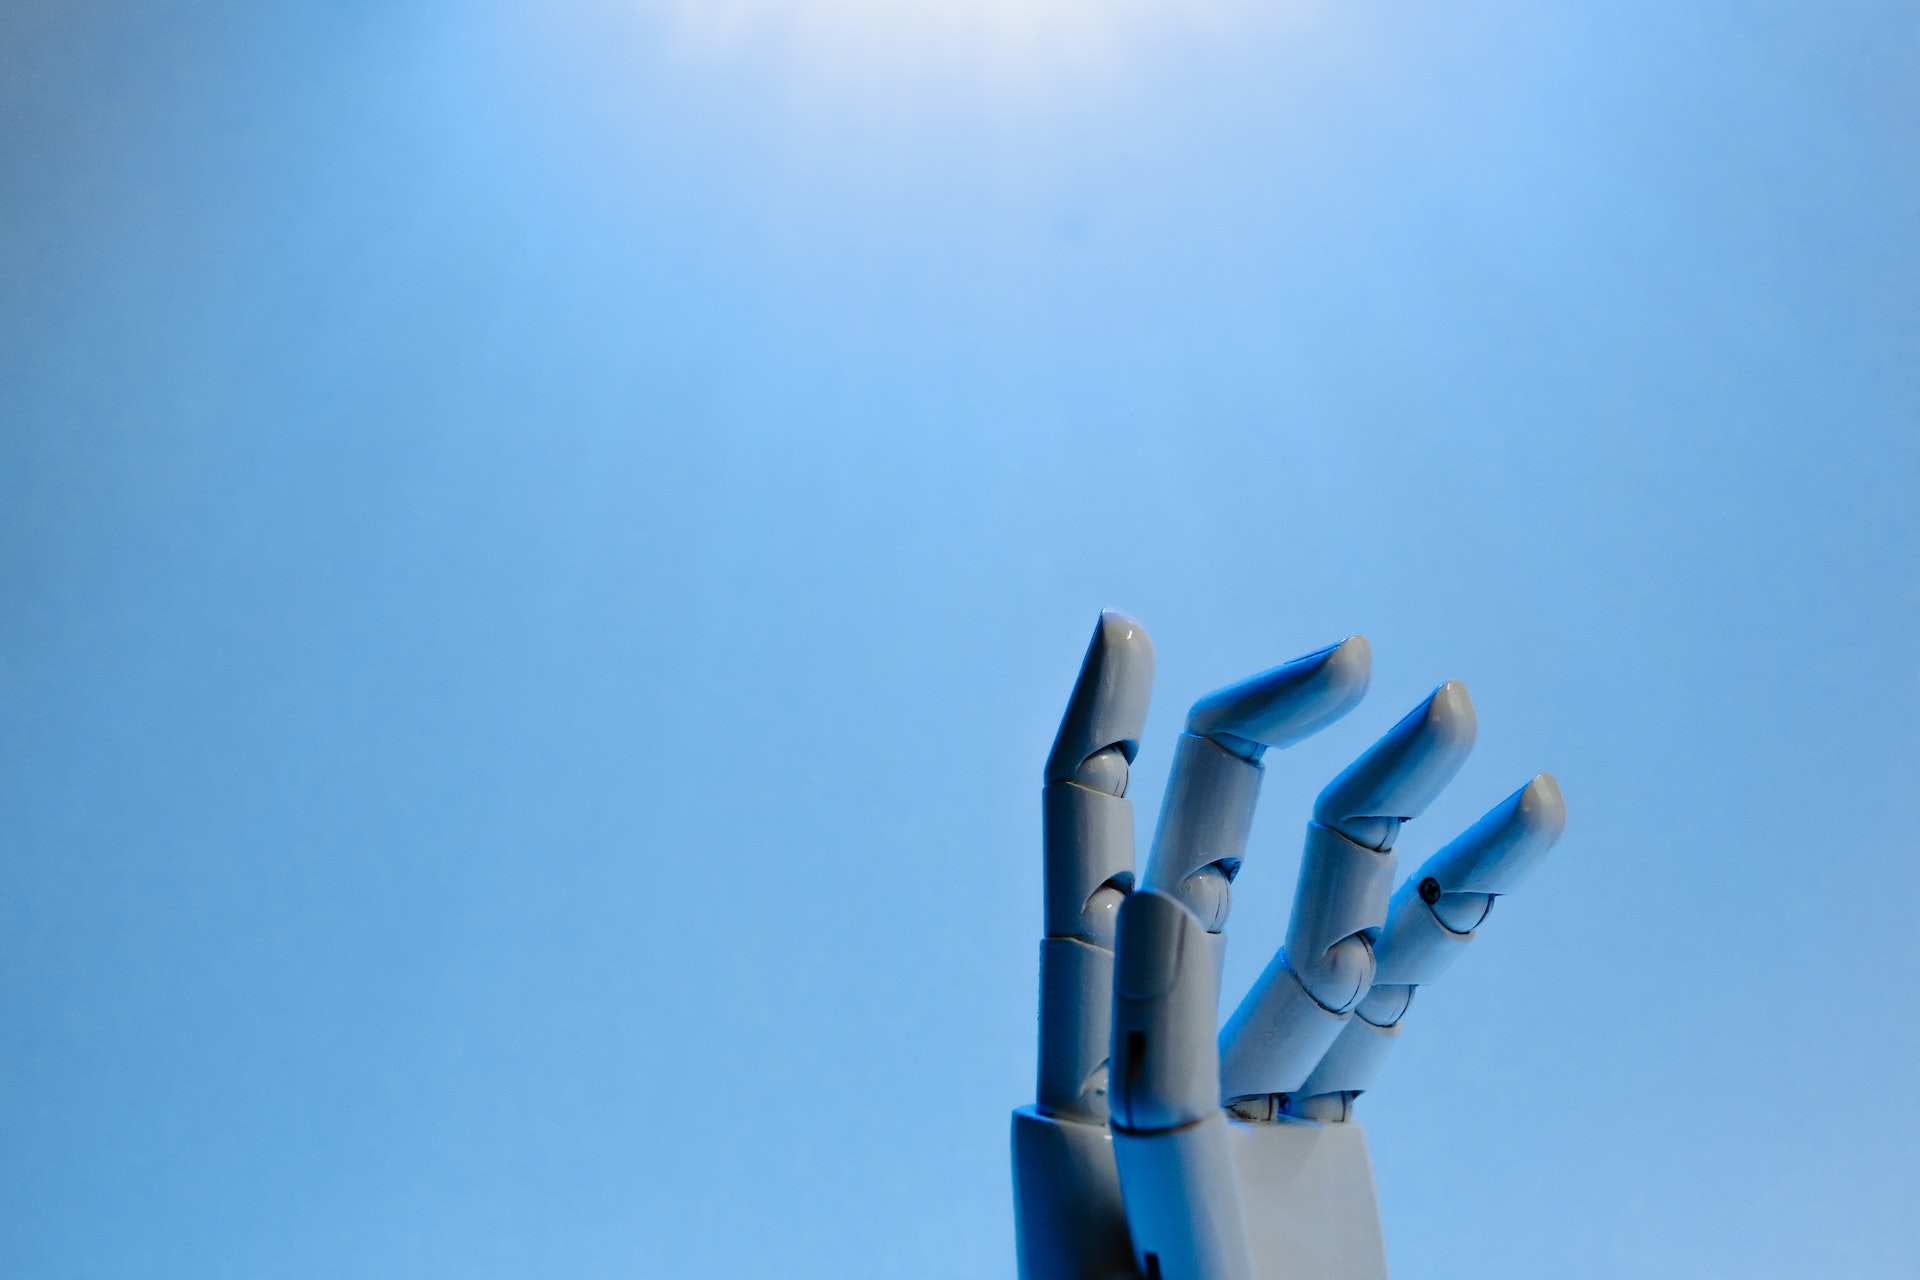 Revolutionize eLearning with hiCreo - white robot hand reaching towards the sky on blue background.